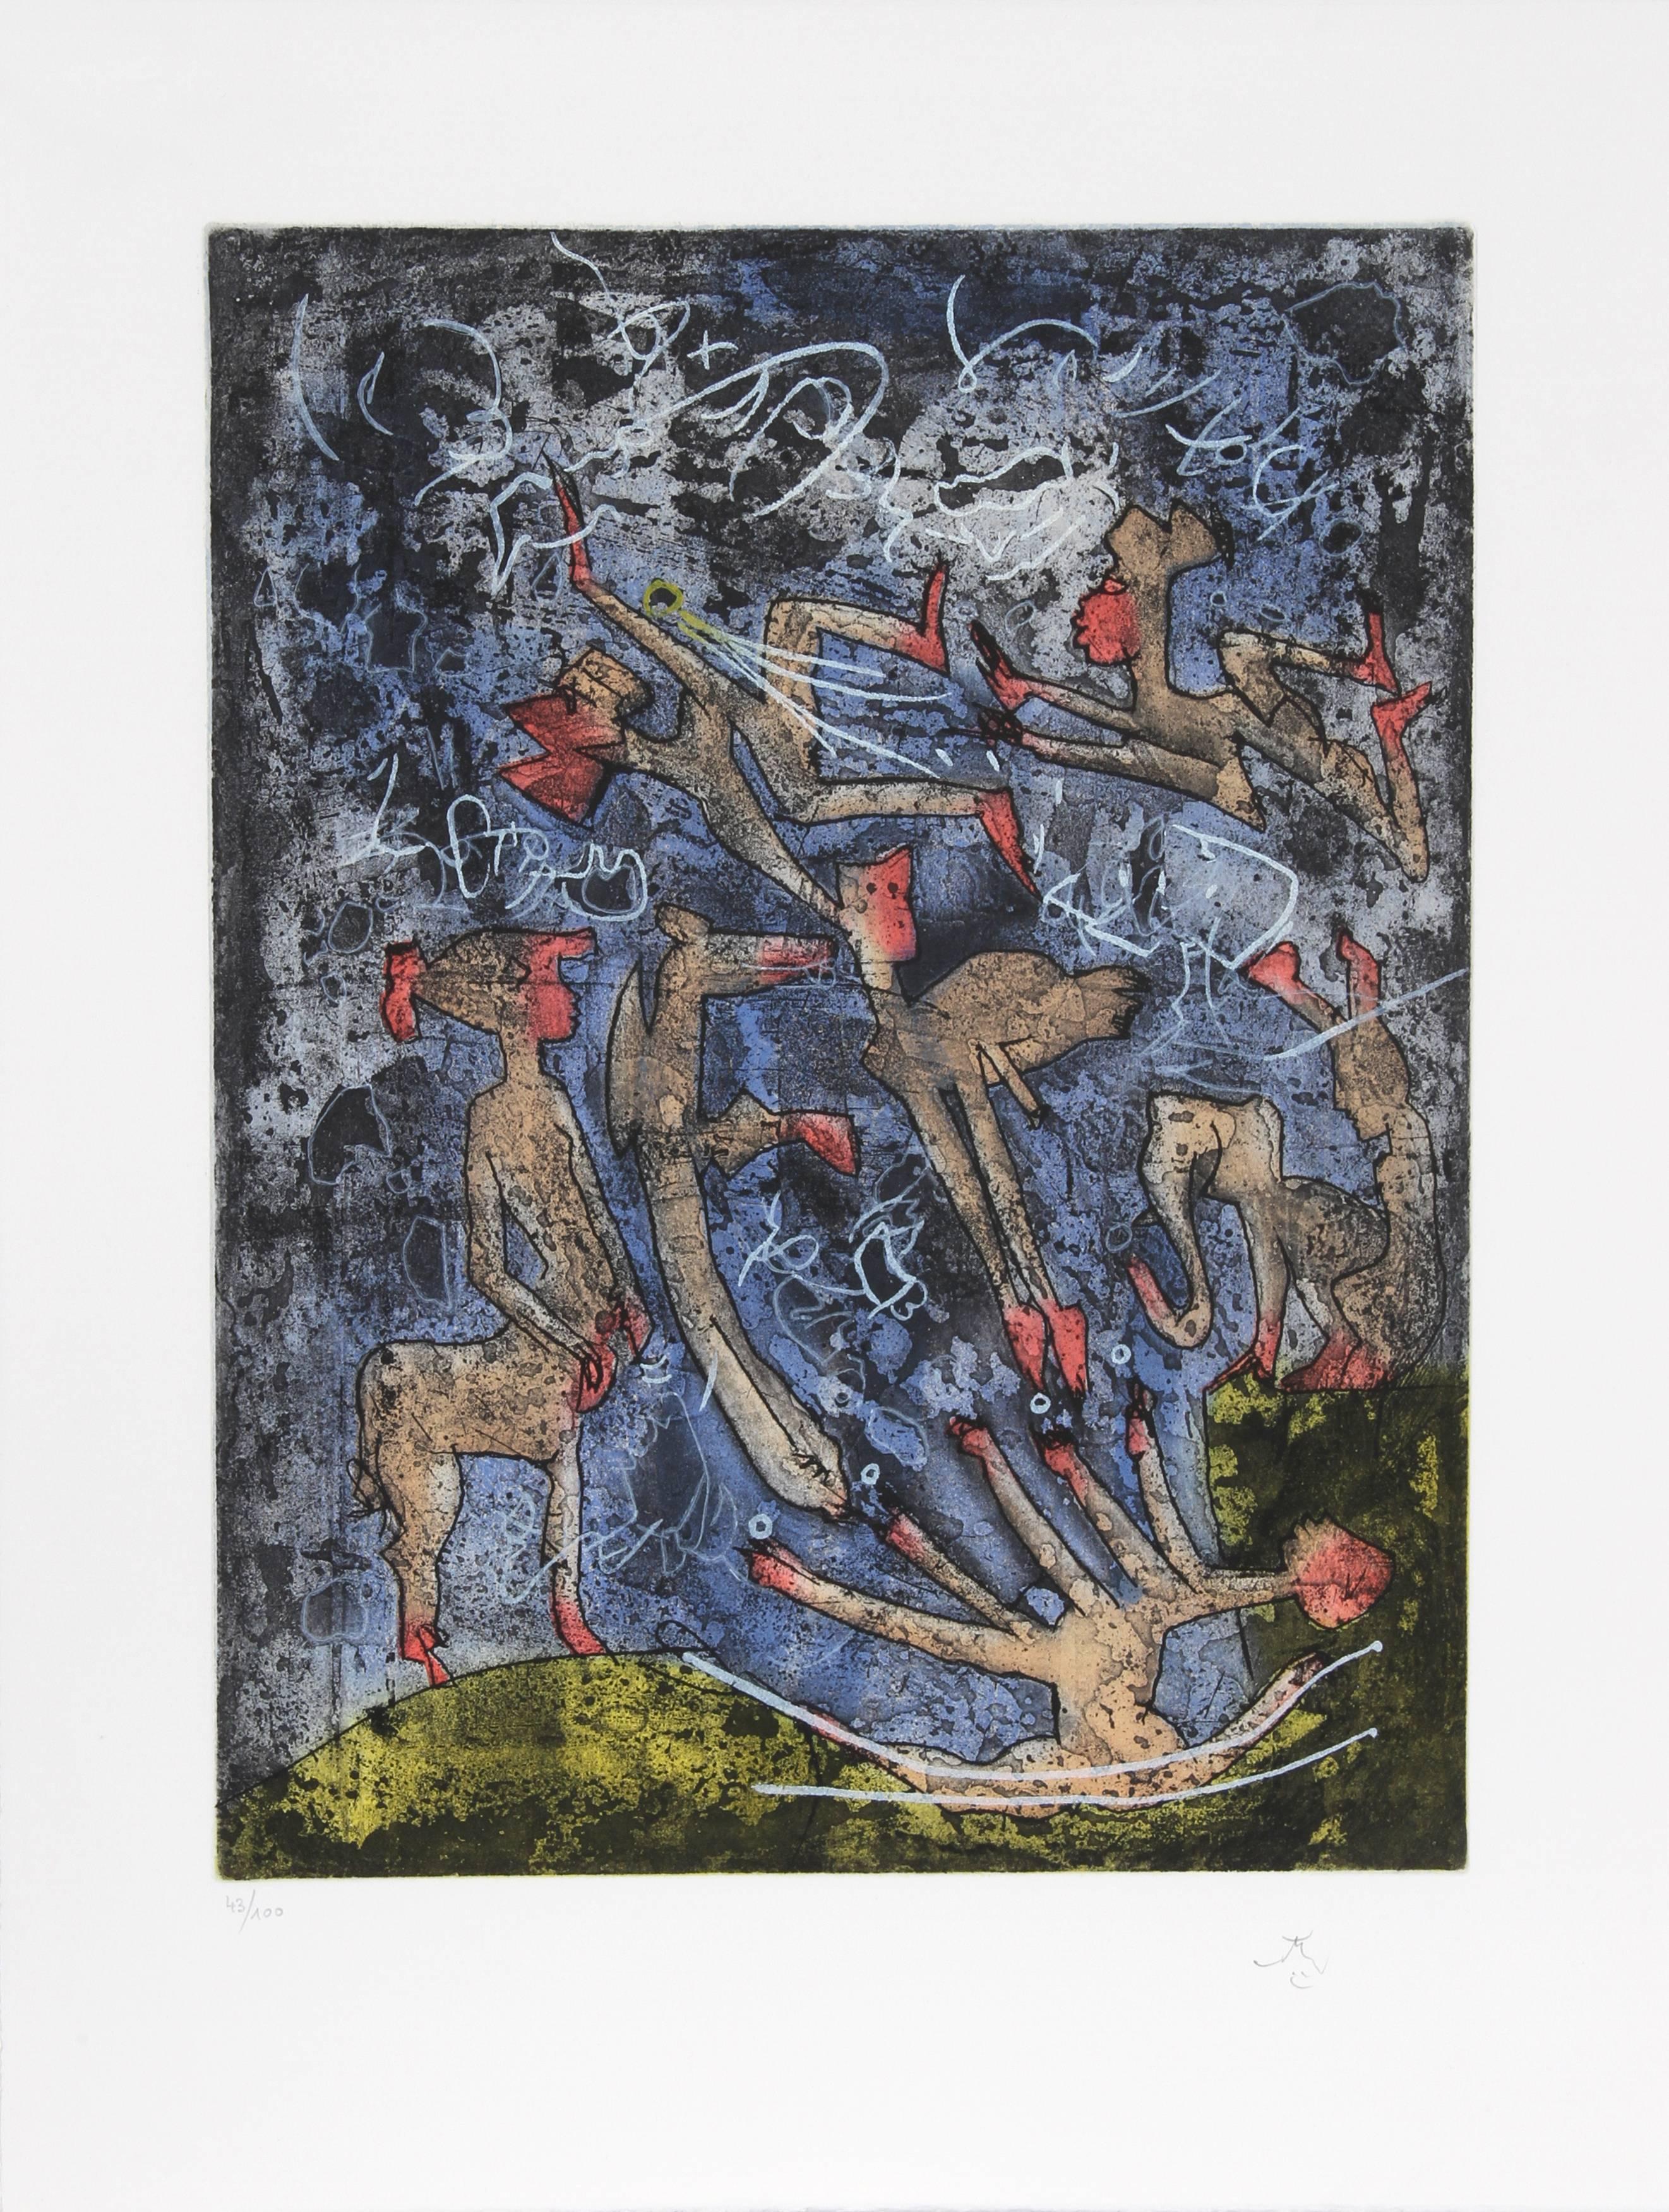 Artist: Roberto Matta
Portfolio: L'ame du Tarot de Theleme
Year: 1994
Medium: Portfolio of Five Aquatint Etchings, each signed and numbered in pencil
Edition: 100, XX
Image Size: 19.25 x 14.5 inches
Paper Size: 26 x 19.5 inches 

Printer: Atelier